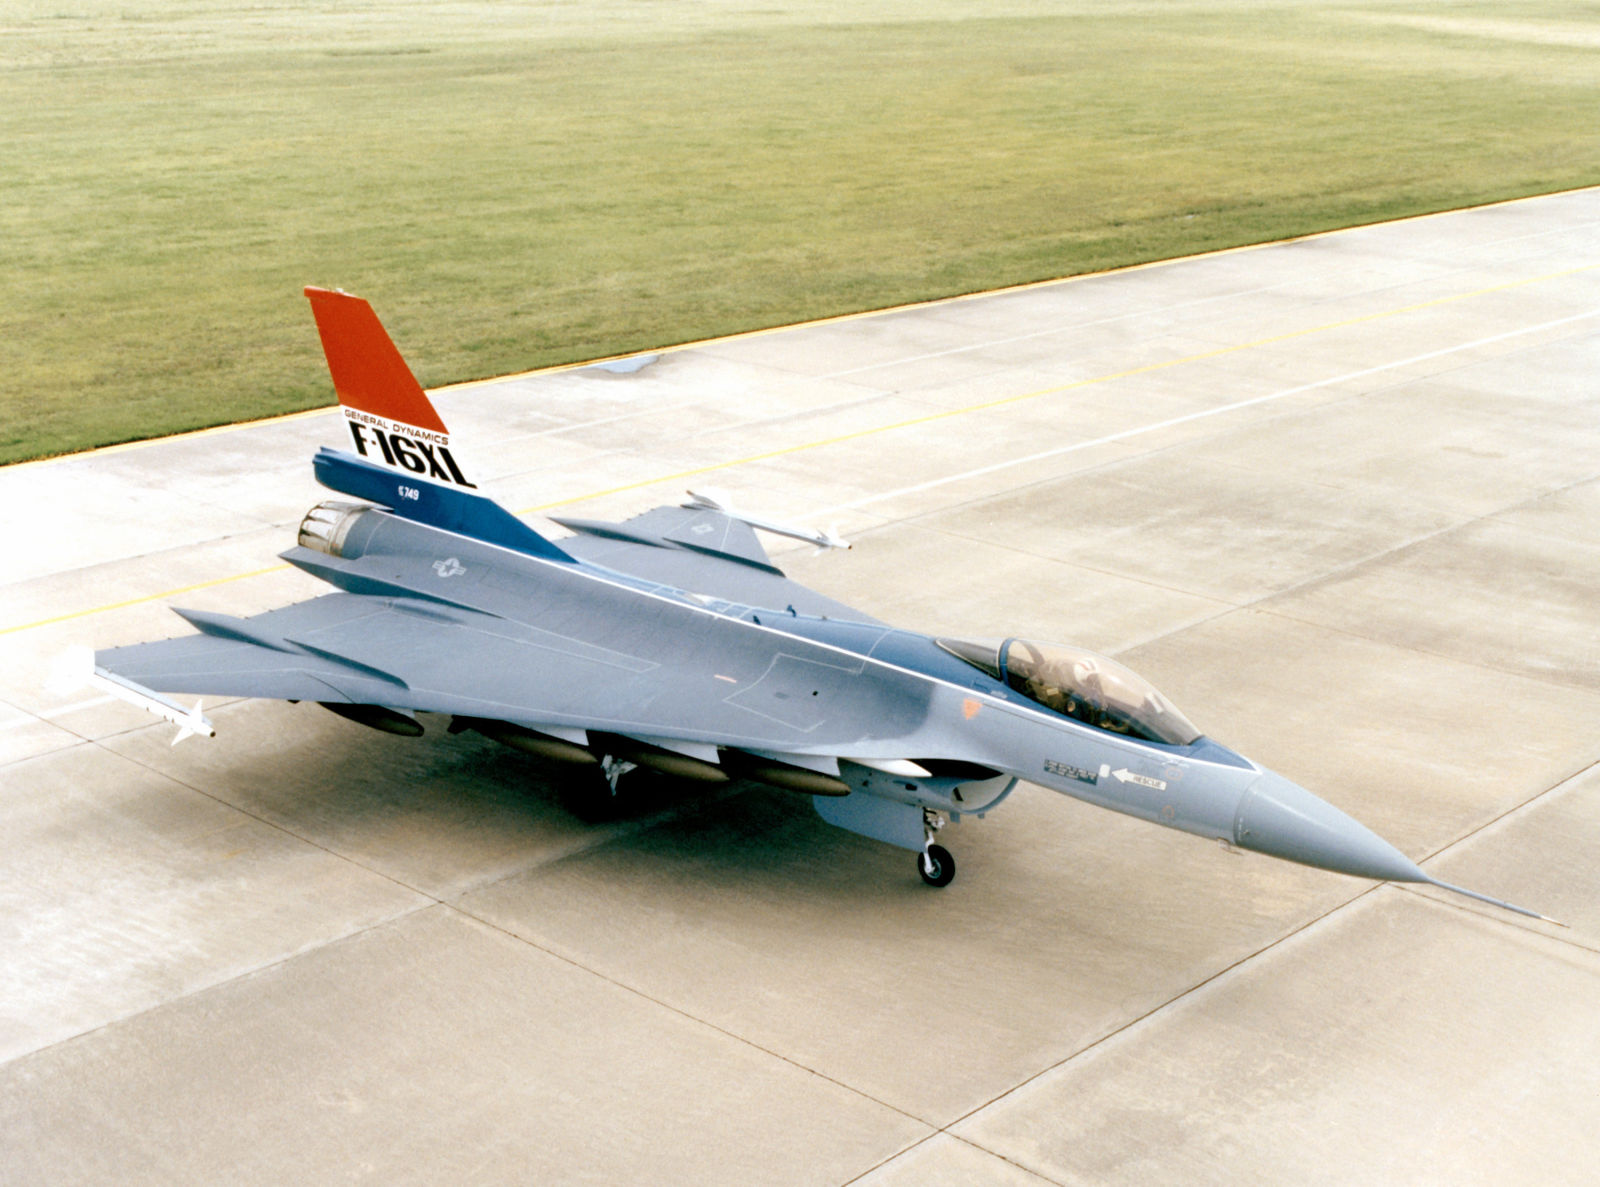 One of the F-16XL prototypes, painted in the early colors and armed with Sidewinders and bombs